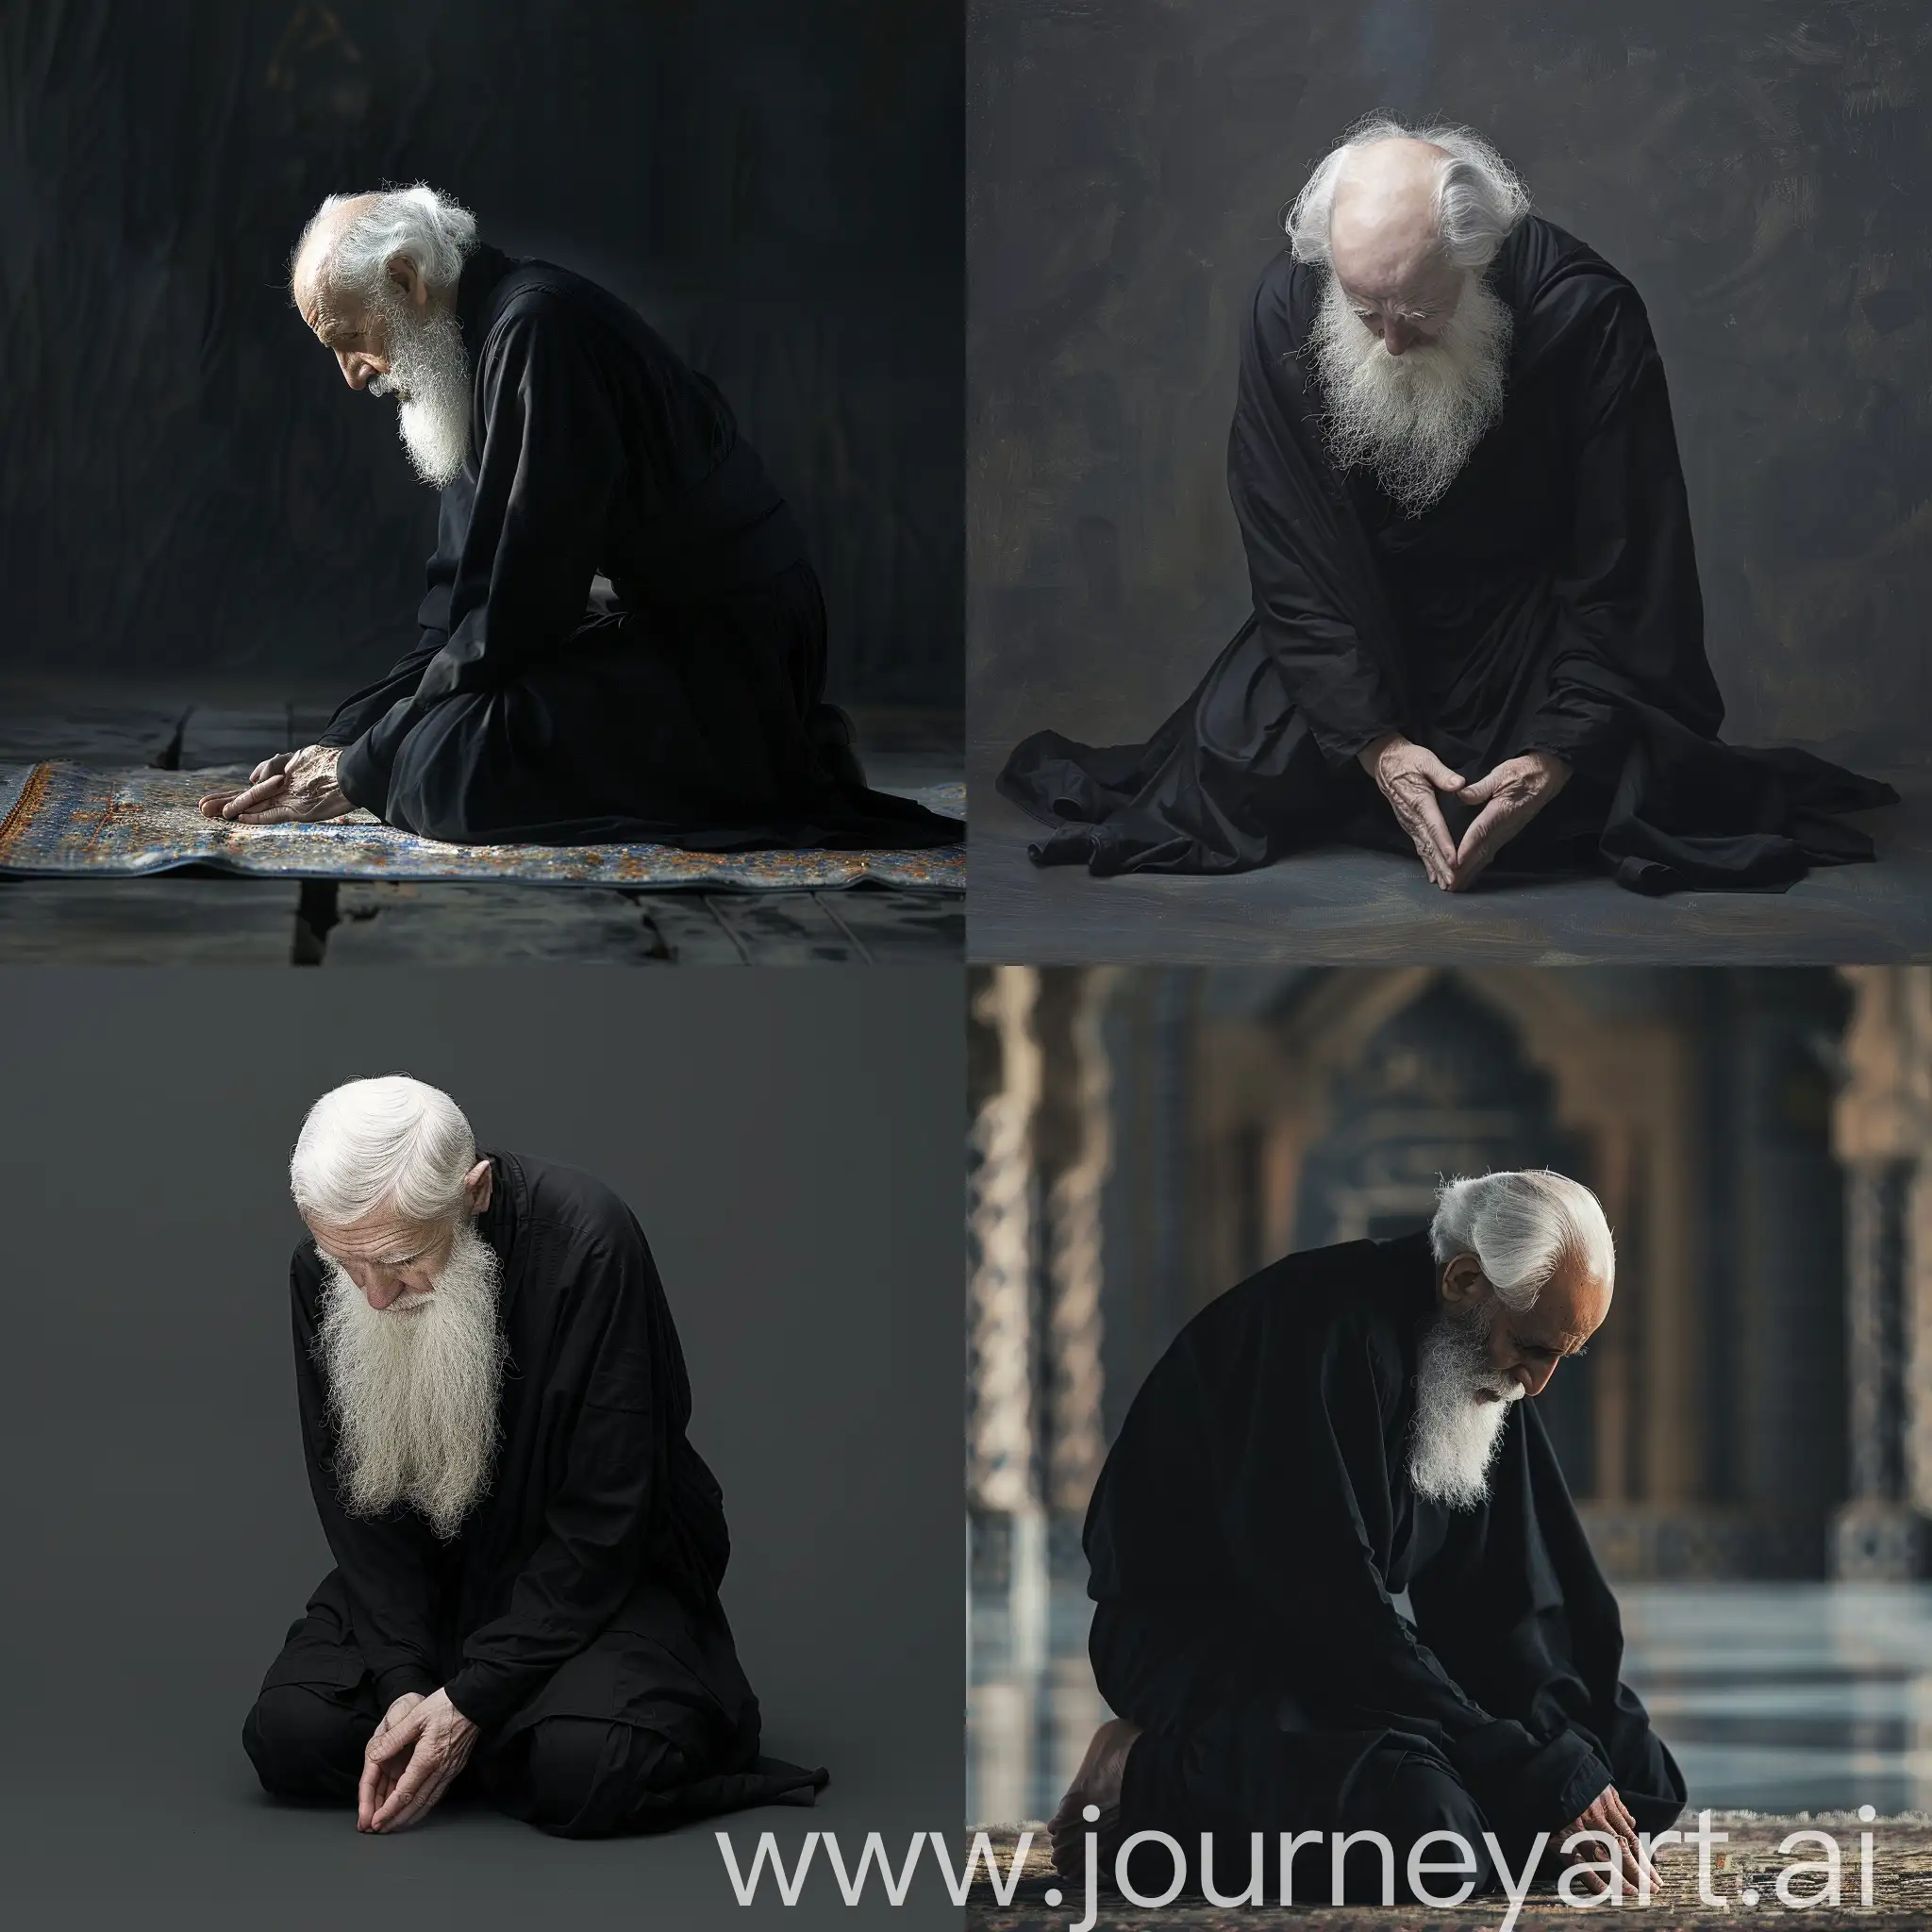 Serene-Monk-in-Prayer-Tranquil-Image-of-a-BlackRobed-Monk-with-White-Hair-and-Beard-Engaged-in-Prayer